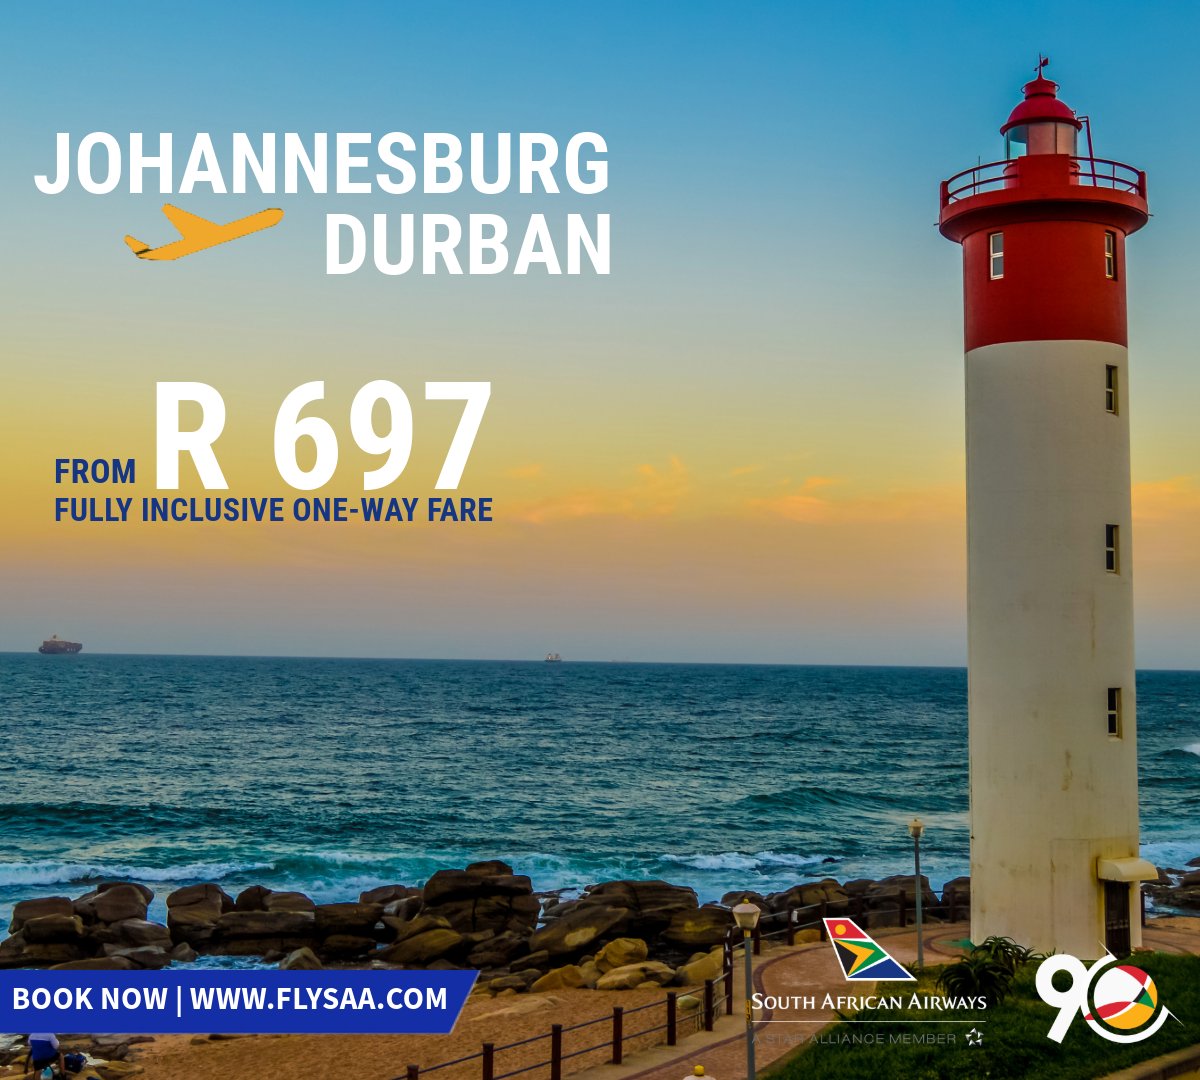 Looking for a coastal getaway? #FlySAA to #Durban with our fantastic fully inclusive one-way fare, from R 697🎉. Book now at flysaa.com. Valid for bookings and travel until 31 May 2024. Terms and conditions apply. #SAA #SAA90 #SAAVoyager